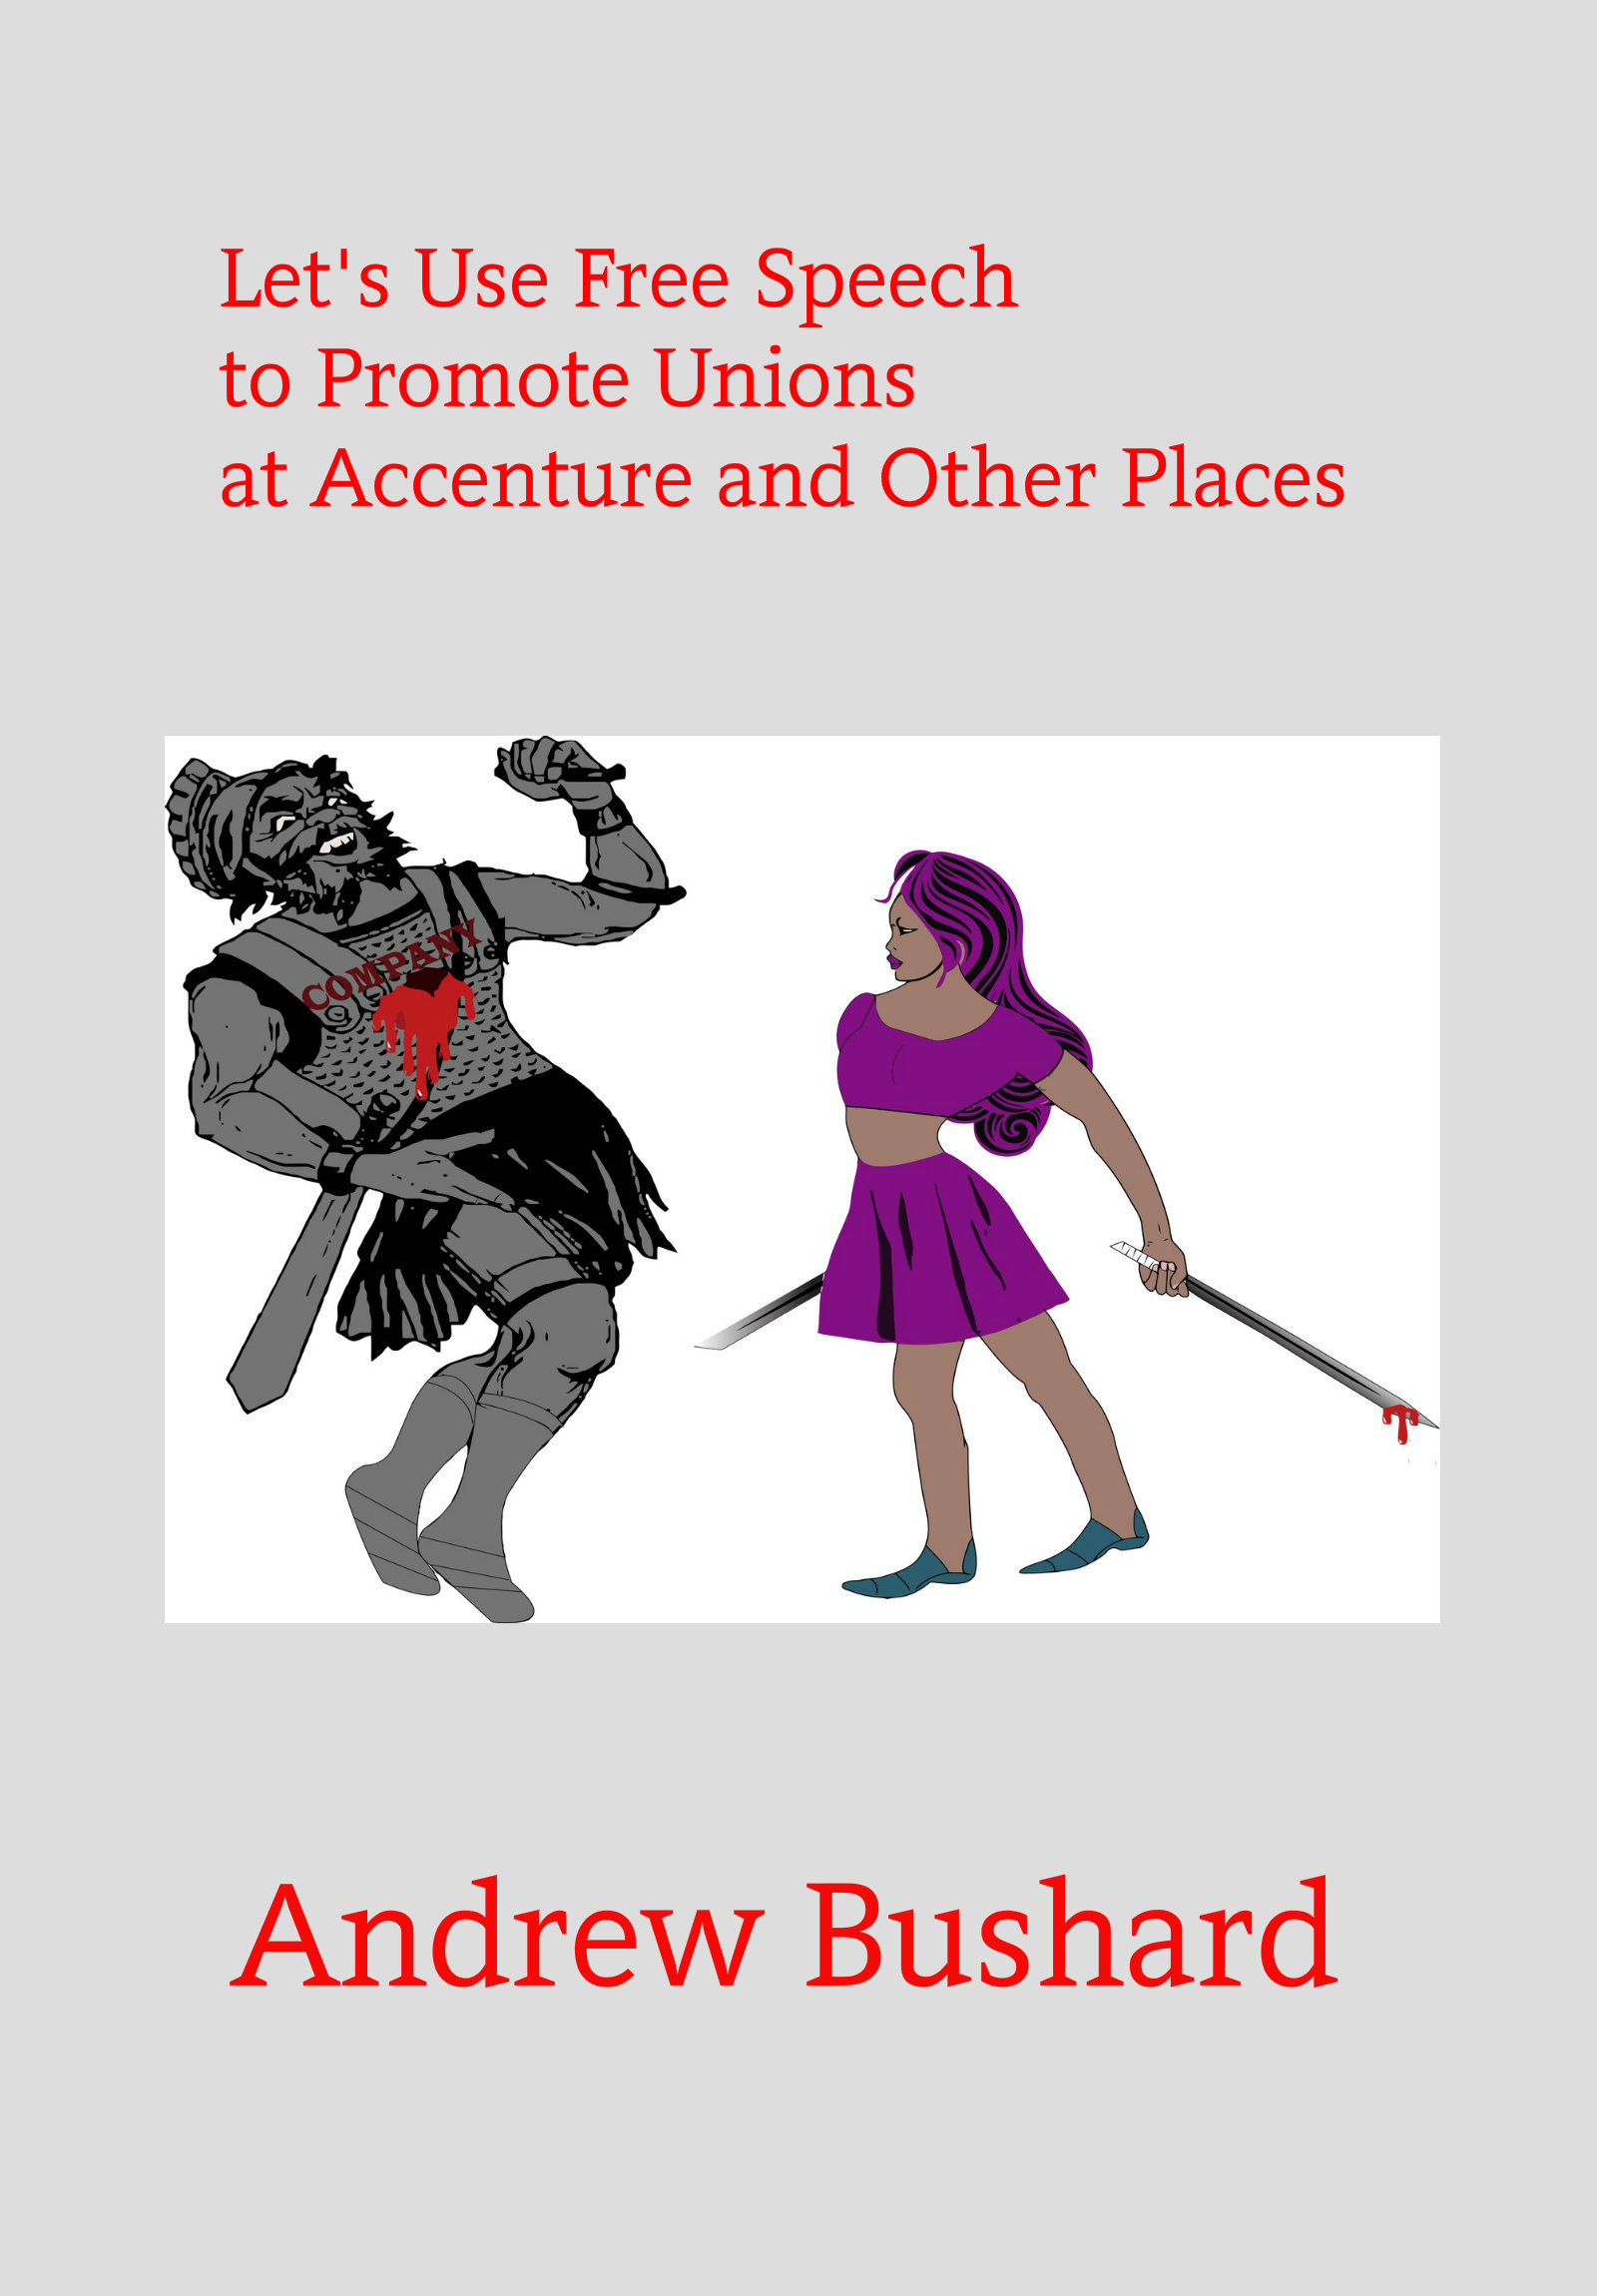 Let's Use Free Speech to Promote Unions at Accenture and Other Places's featured image